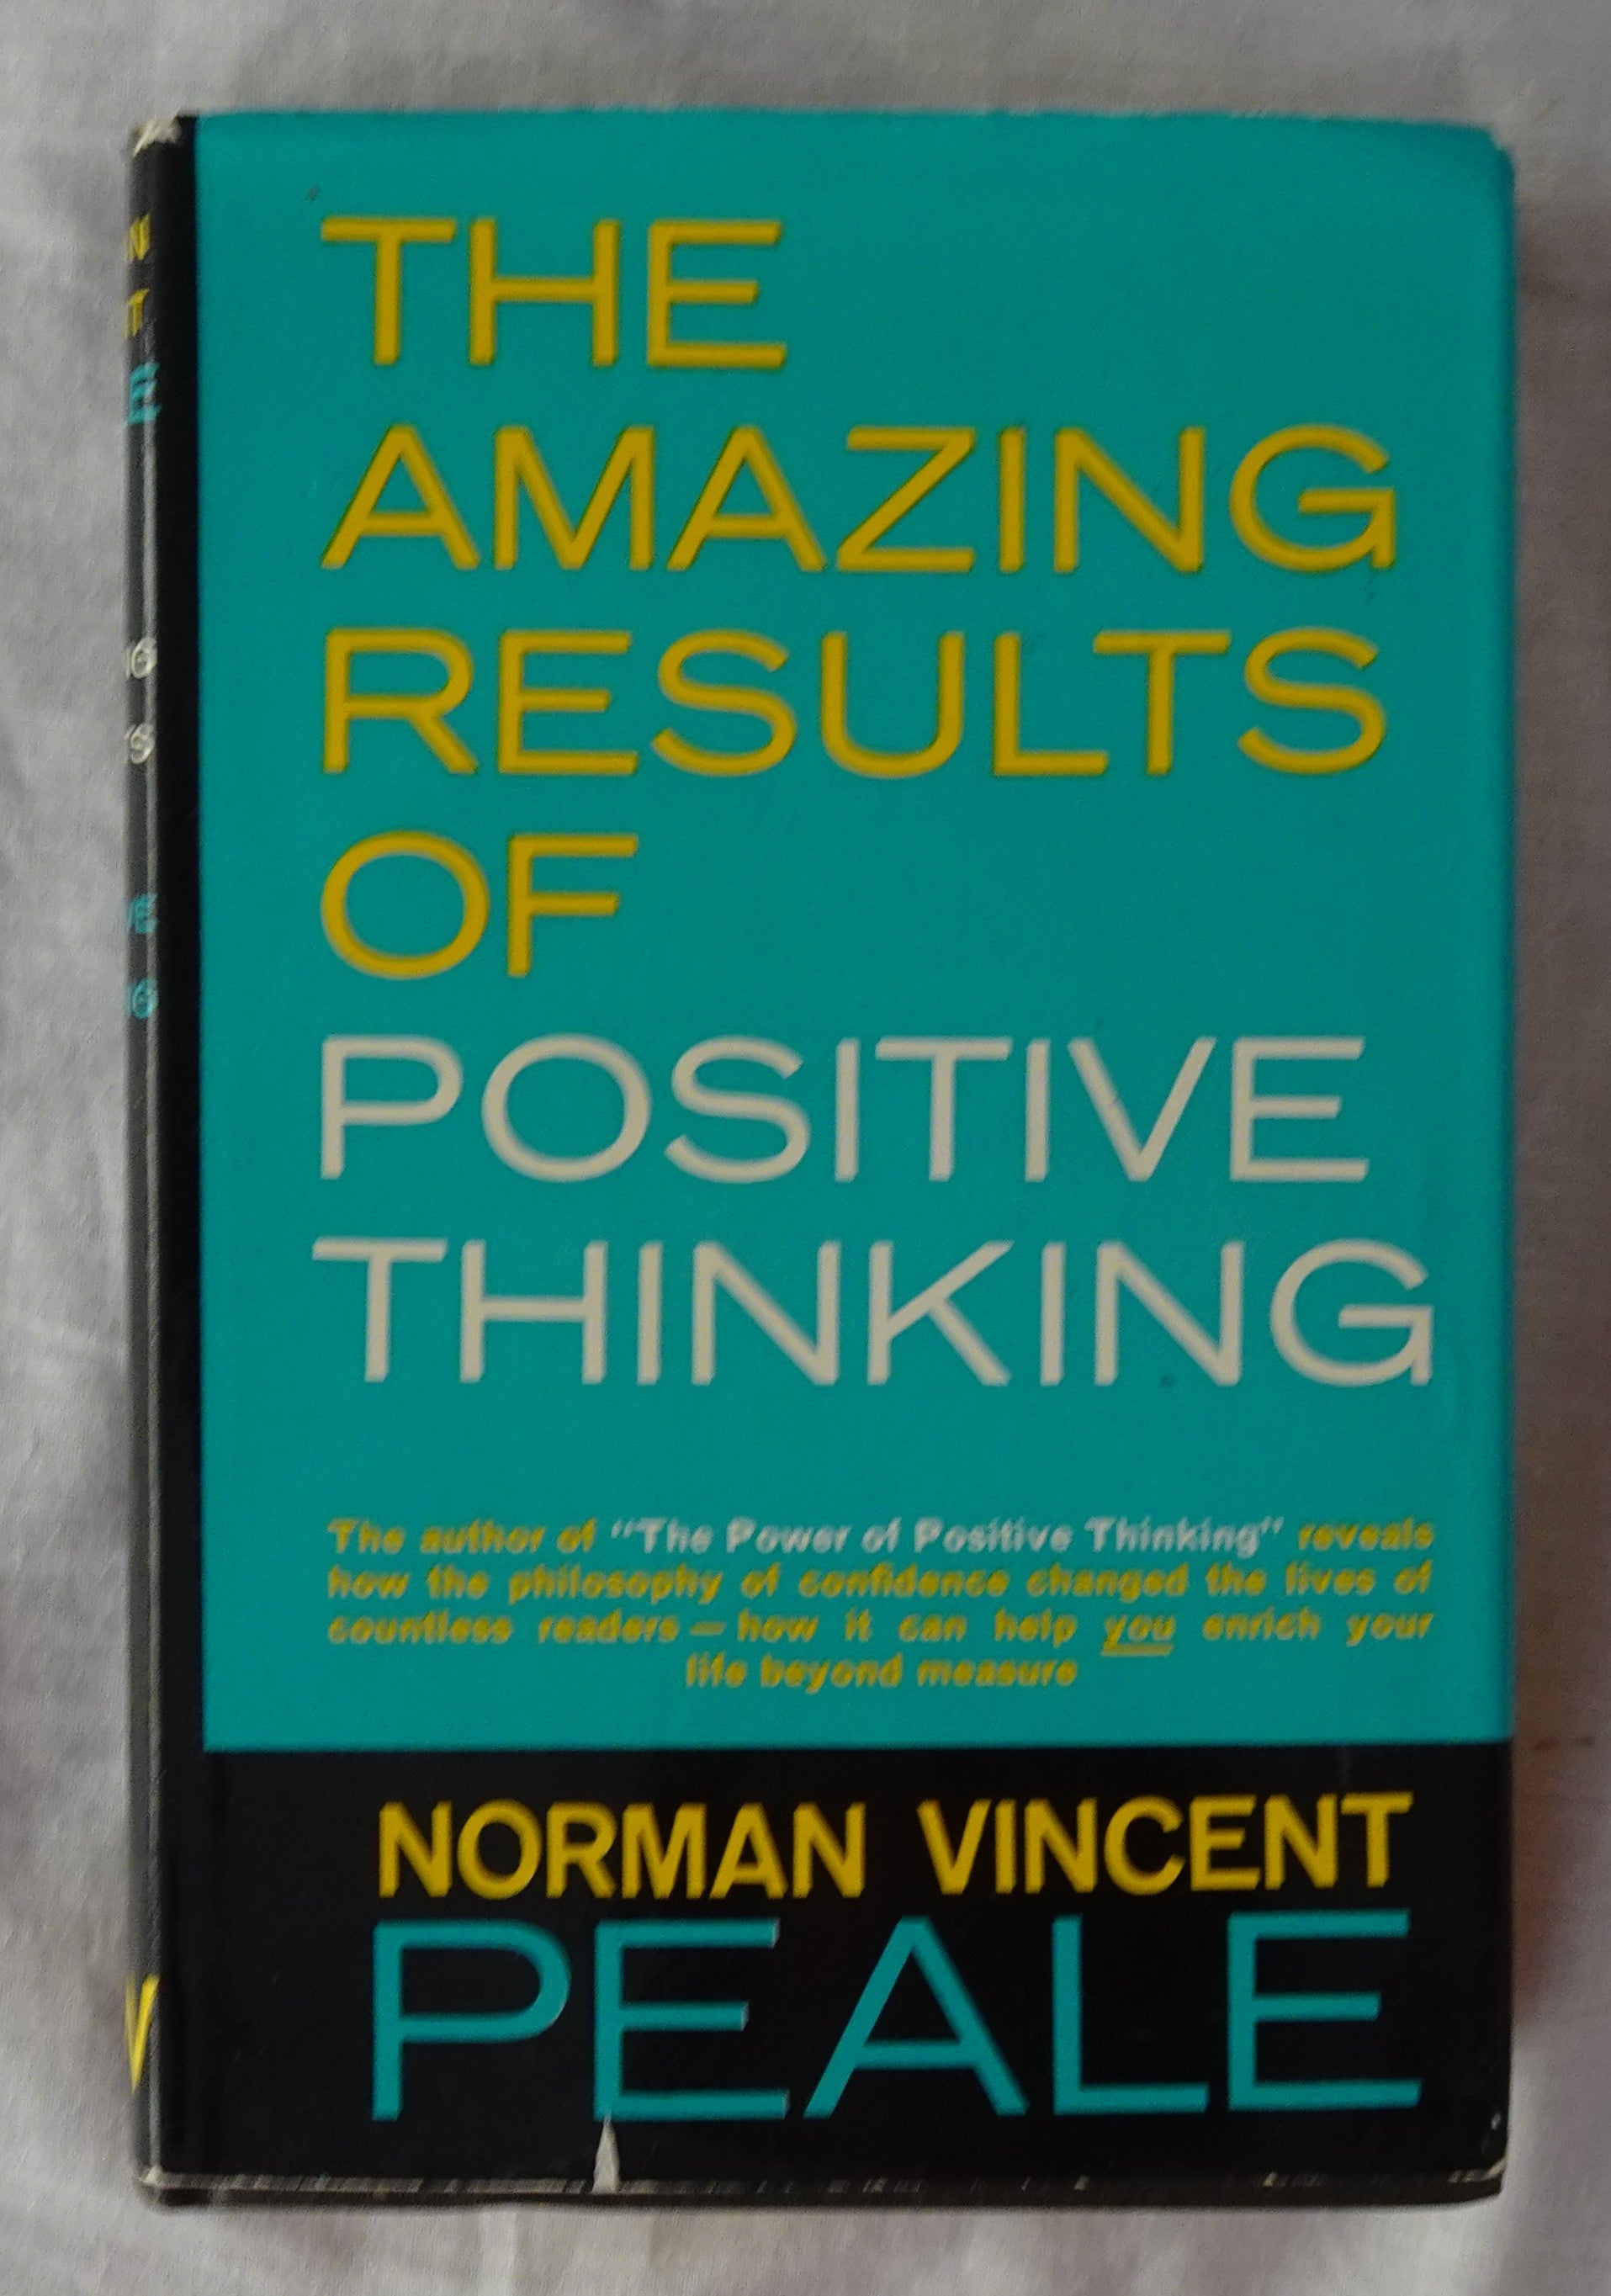 The Amazing Results of Positive Thinking  by Norman Vincent Peale  A Cedar Book No. 108